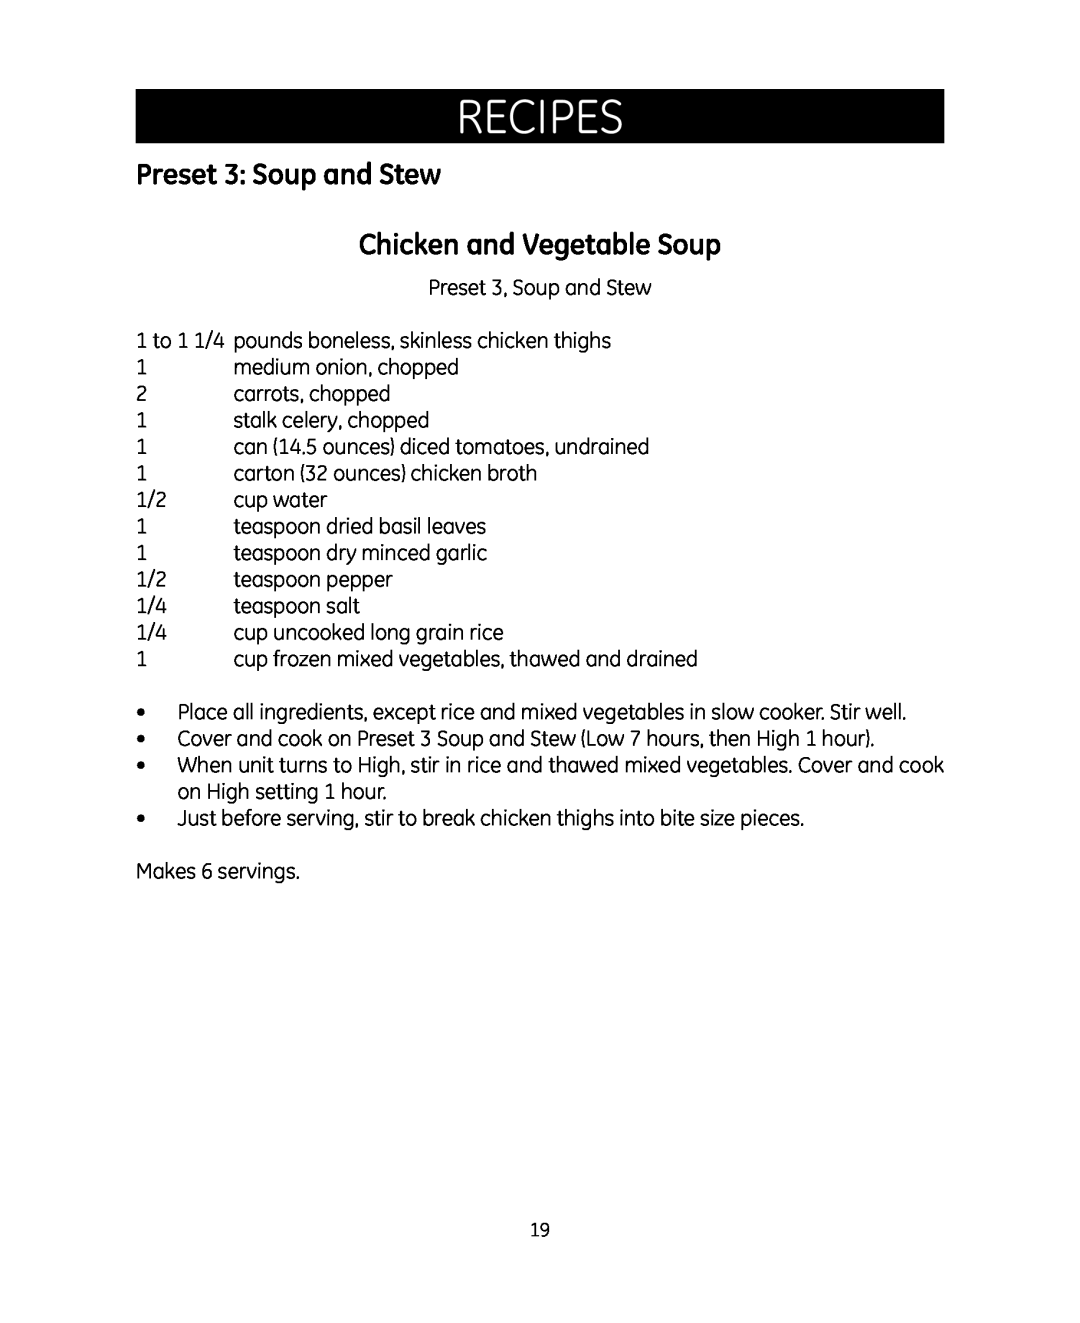 GE 681131692007 manual Preset 3 Soup and Stew, Chicken and Vegetable Soup, Recipes 